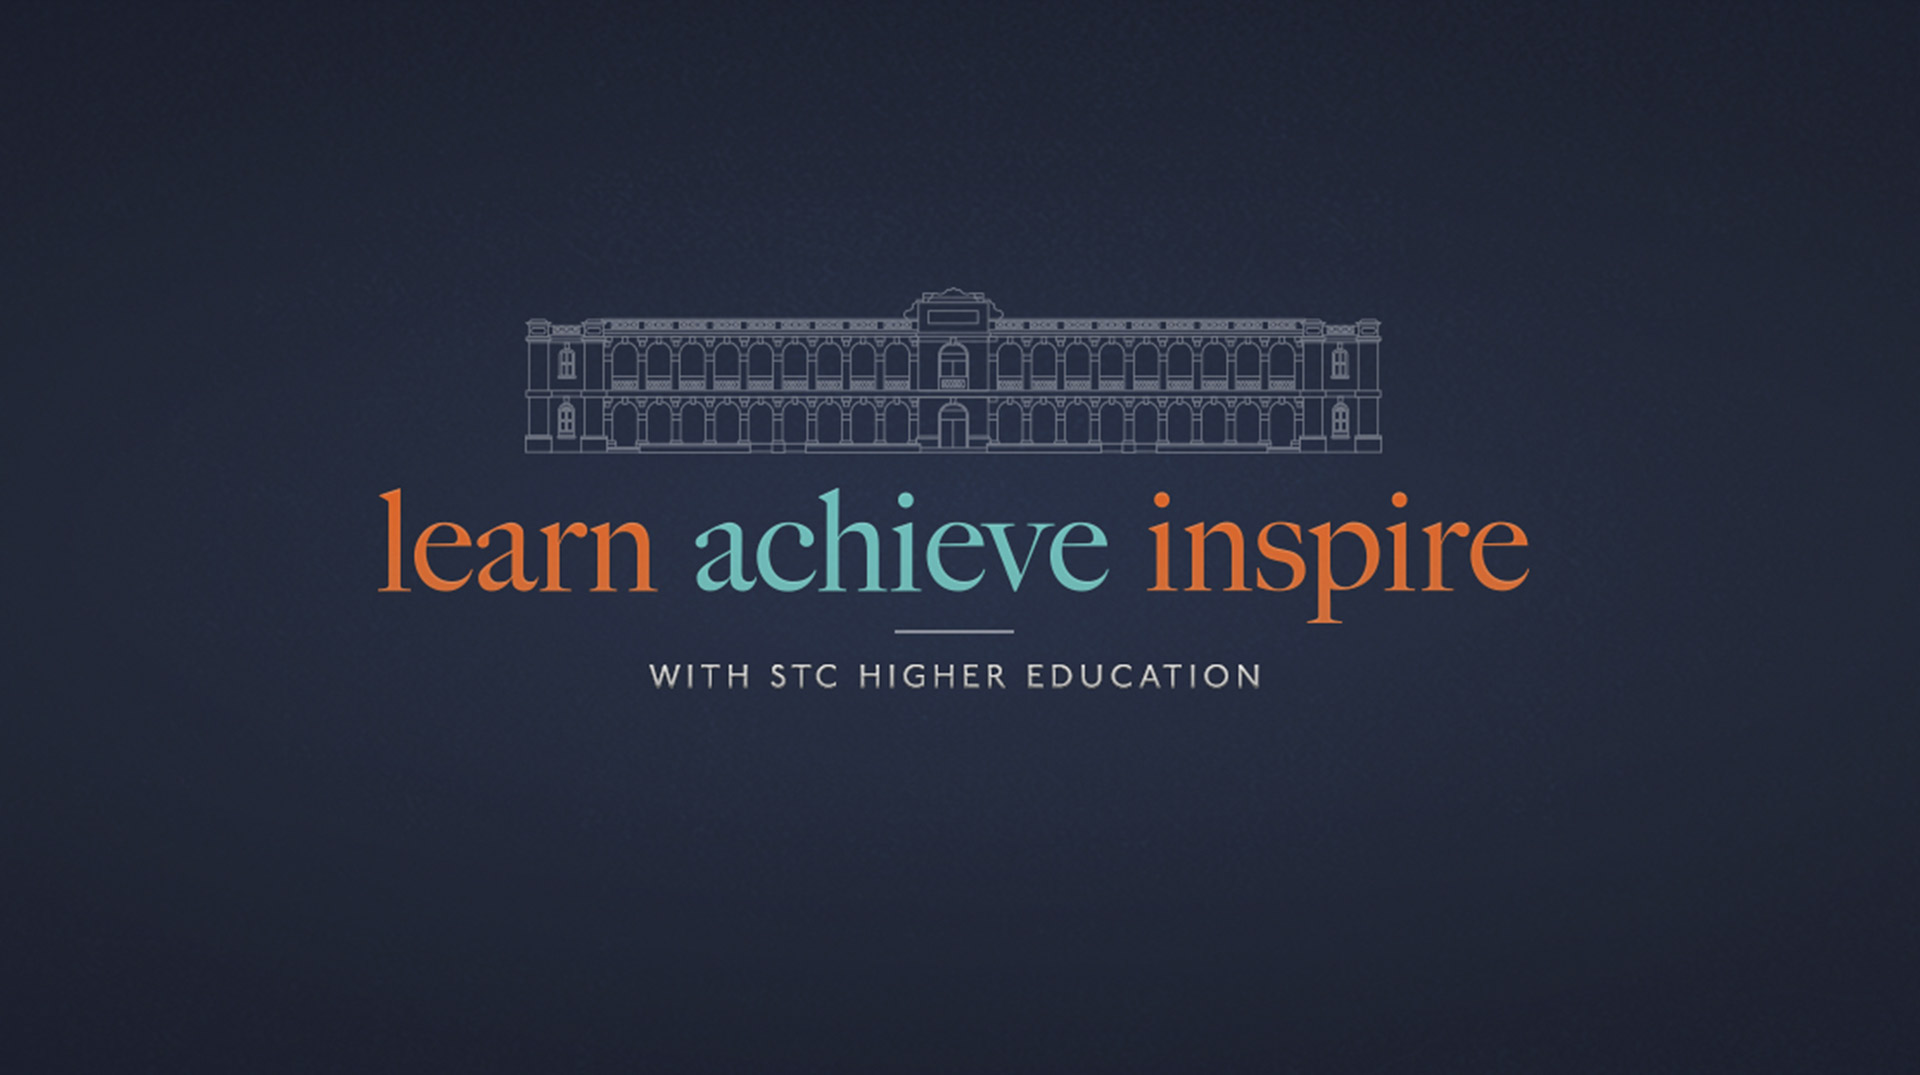 STC Higher Education